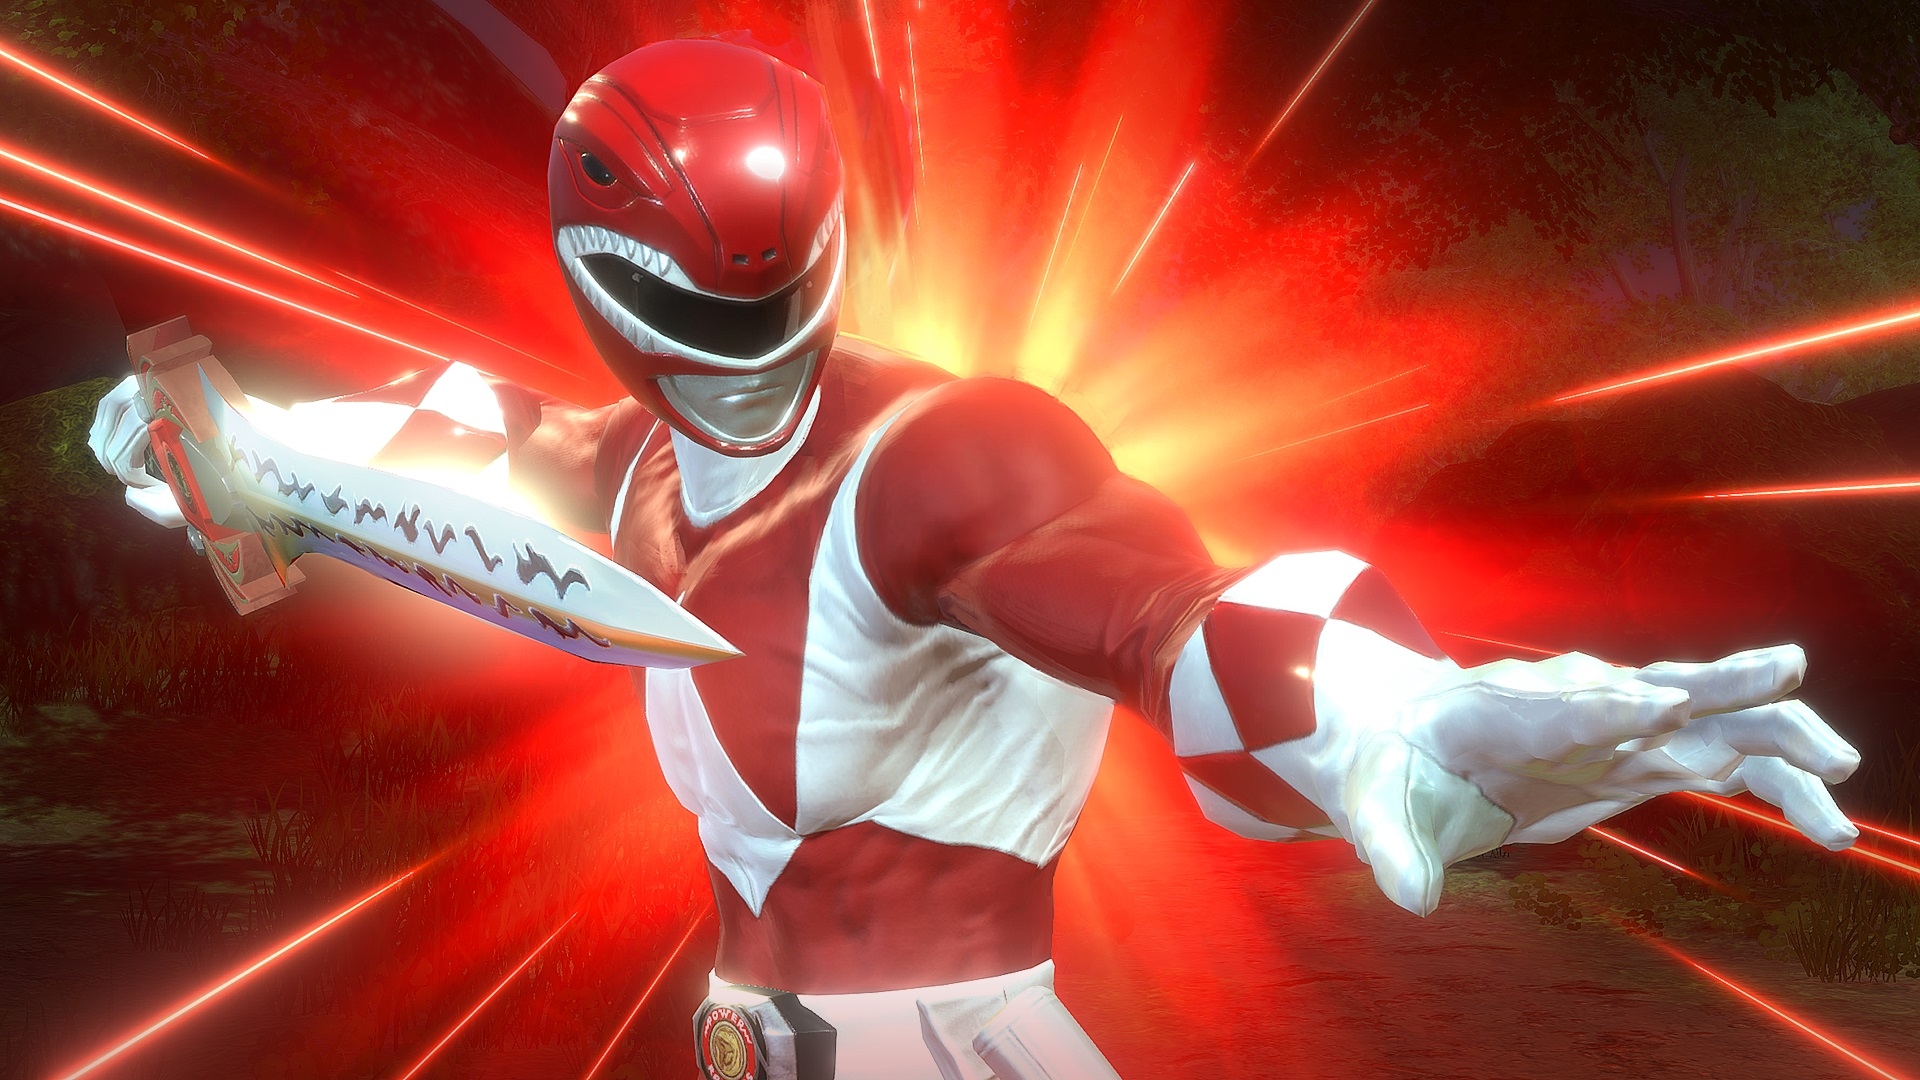 Power Rangers: Battle For The Grid Physical Collector’s Edition Releases This October